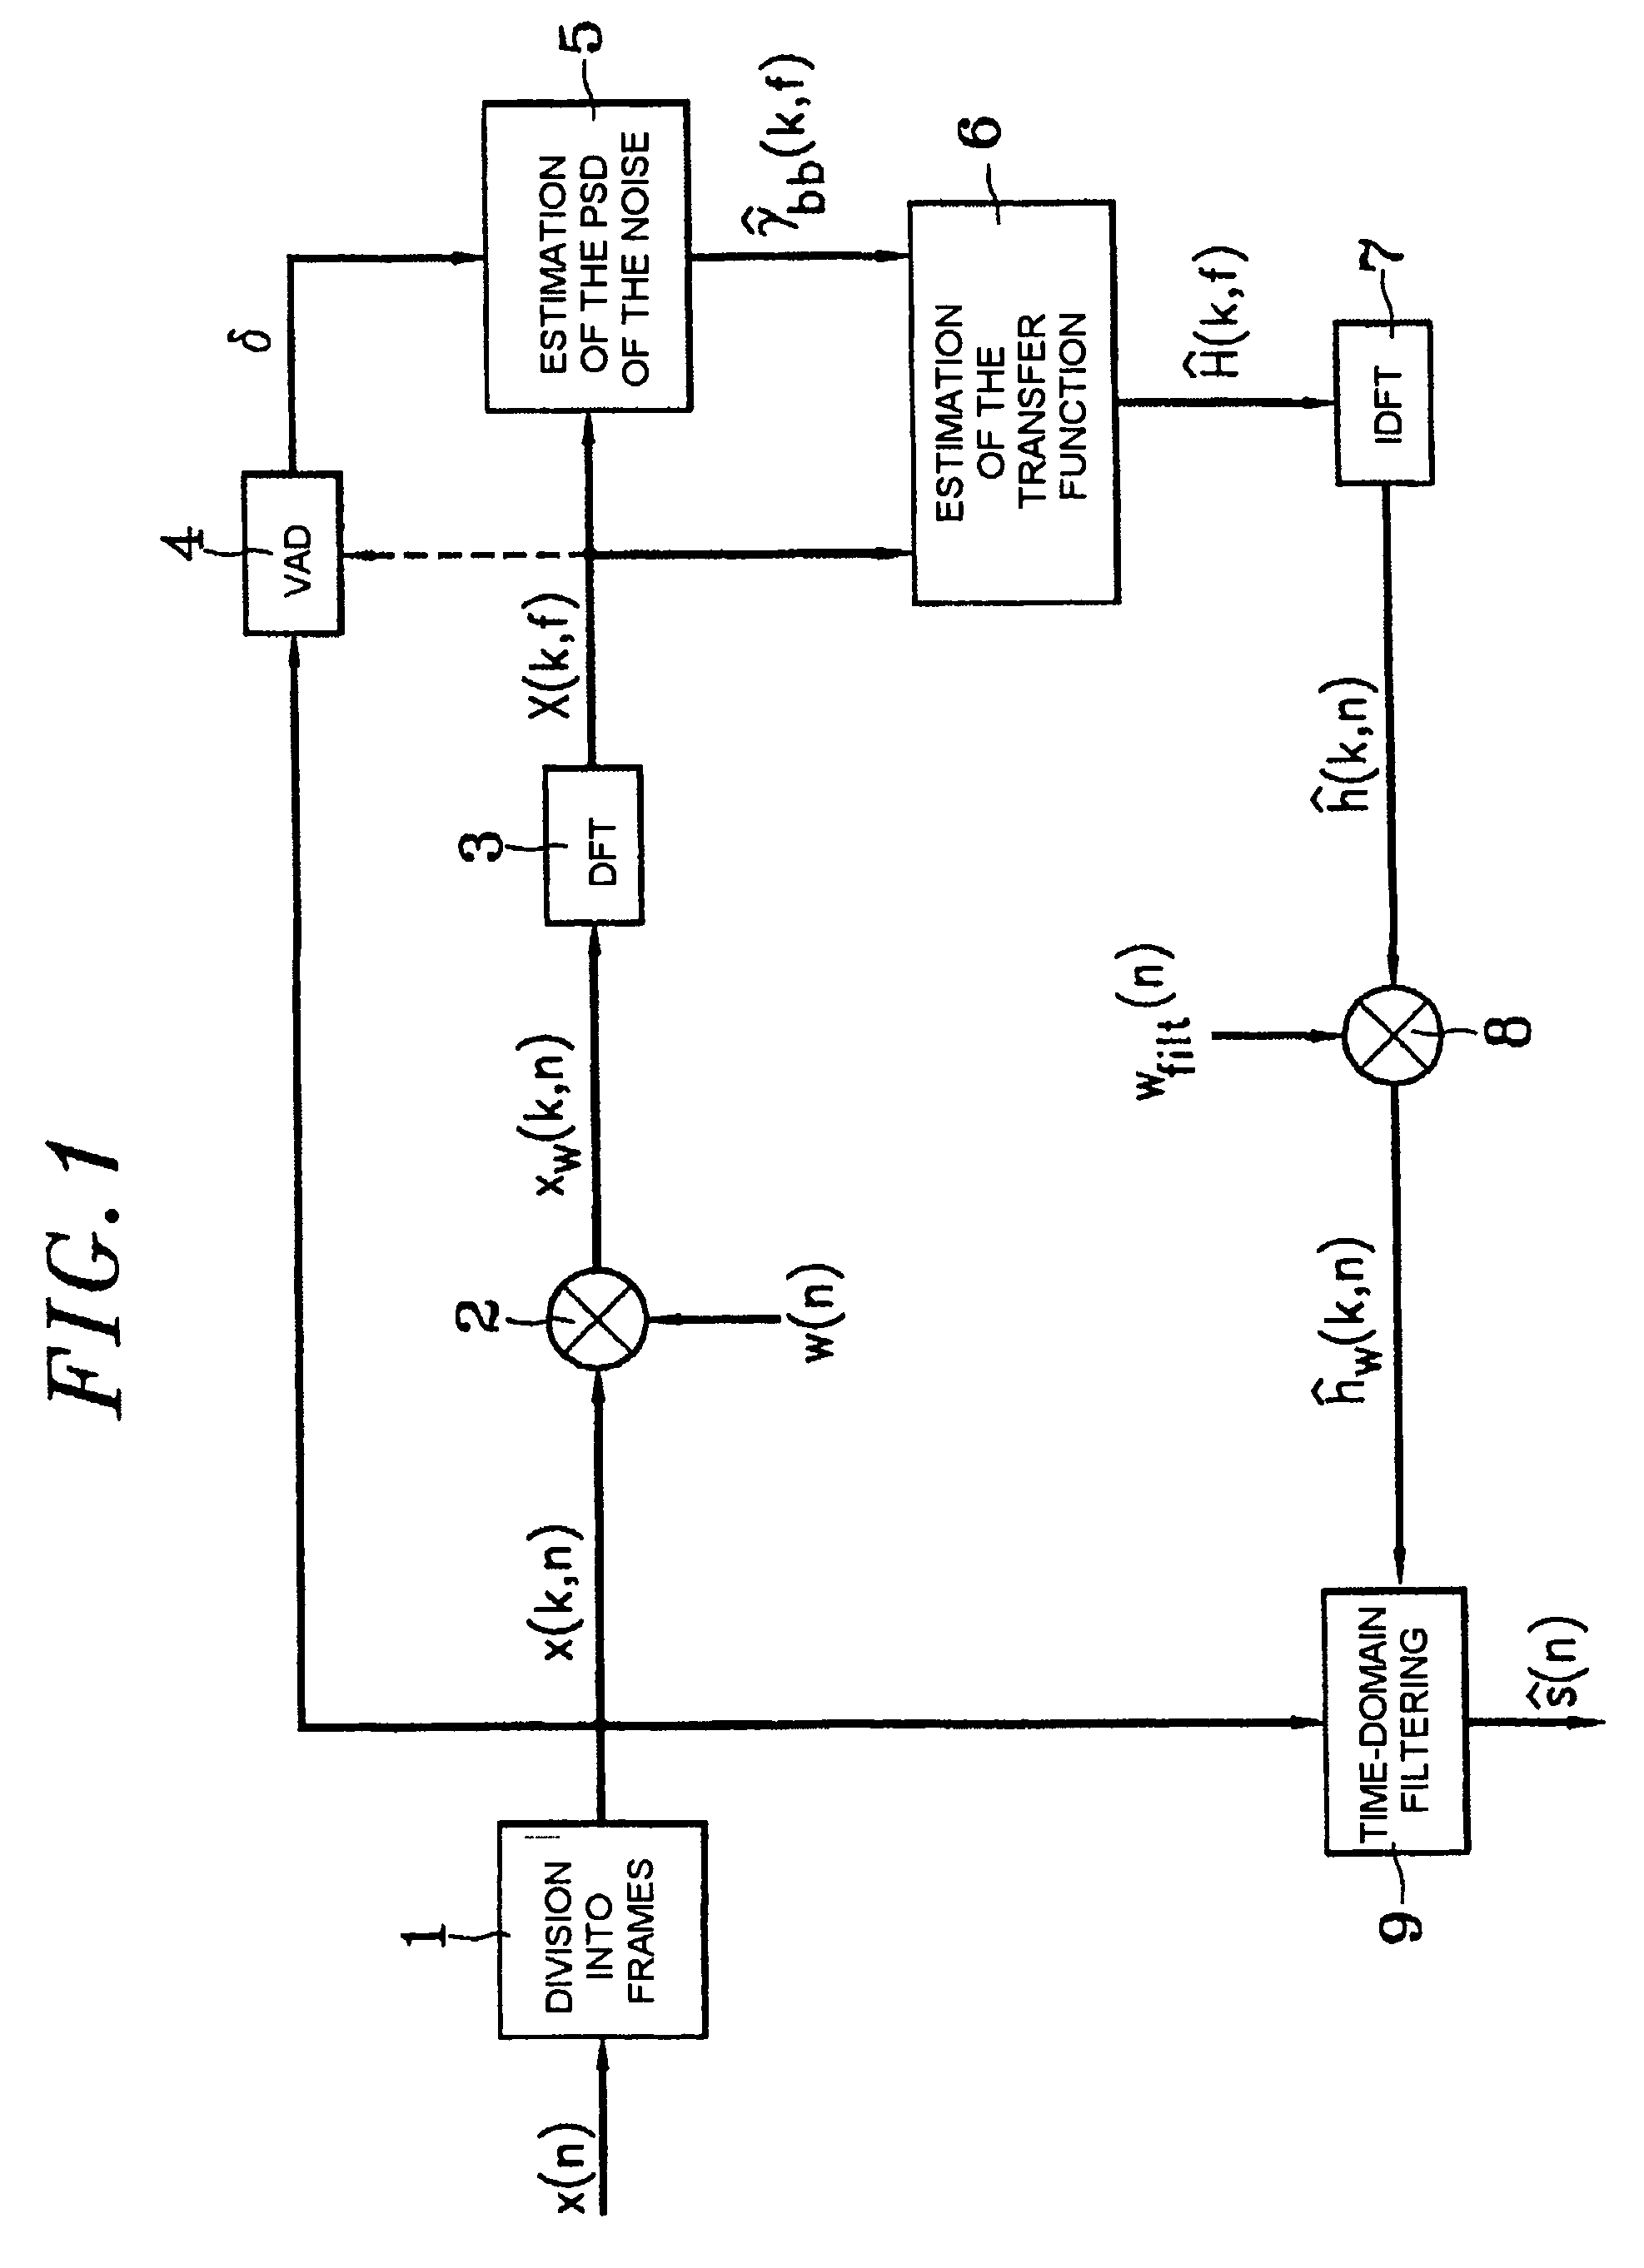 Noise reduction method and device using two pass filtering